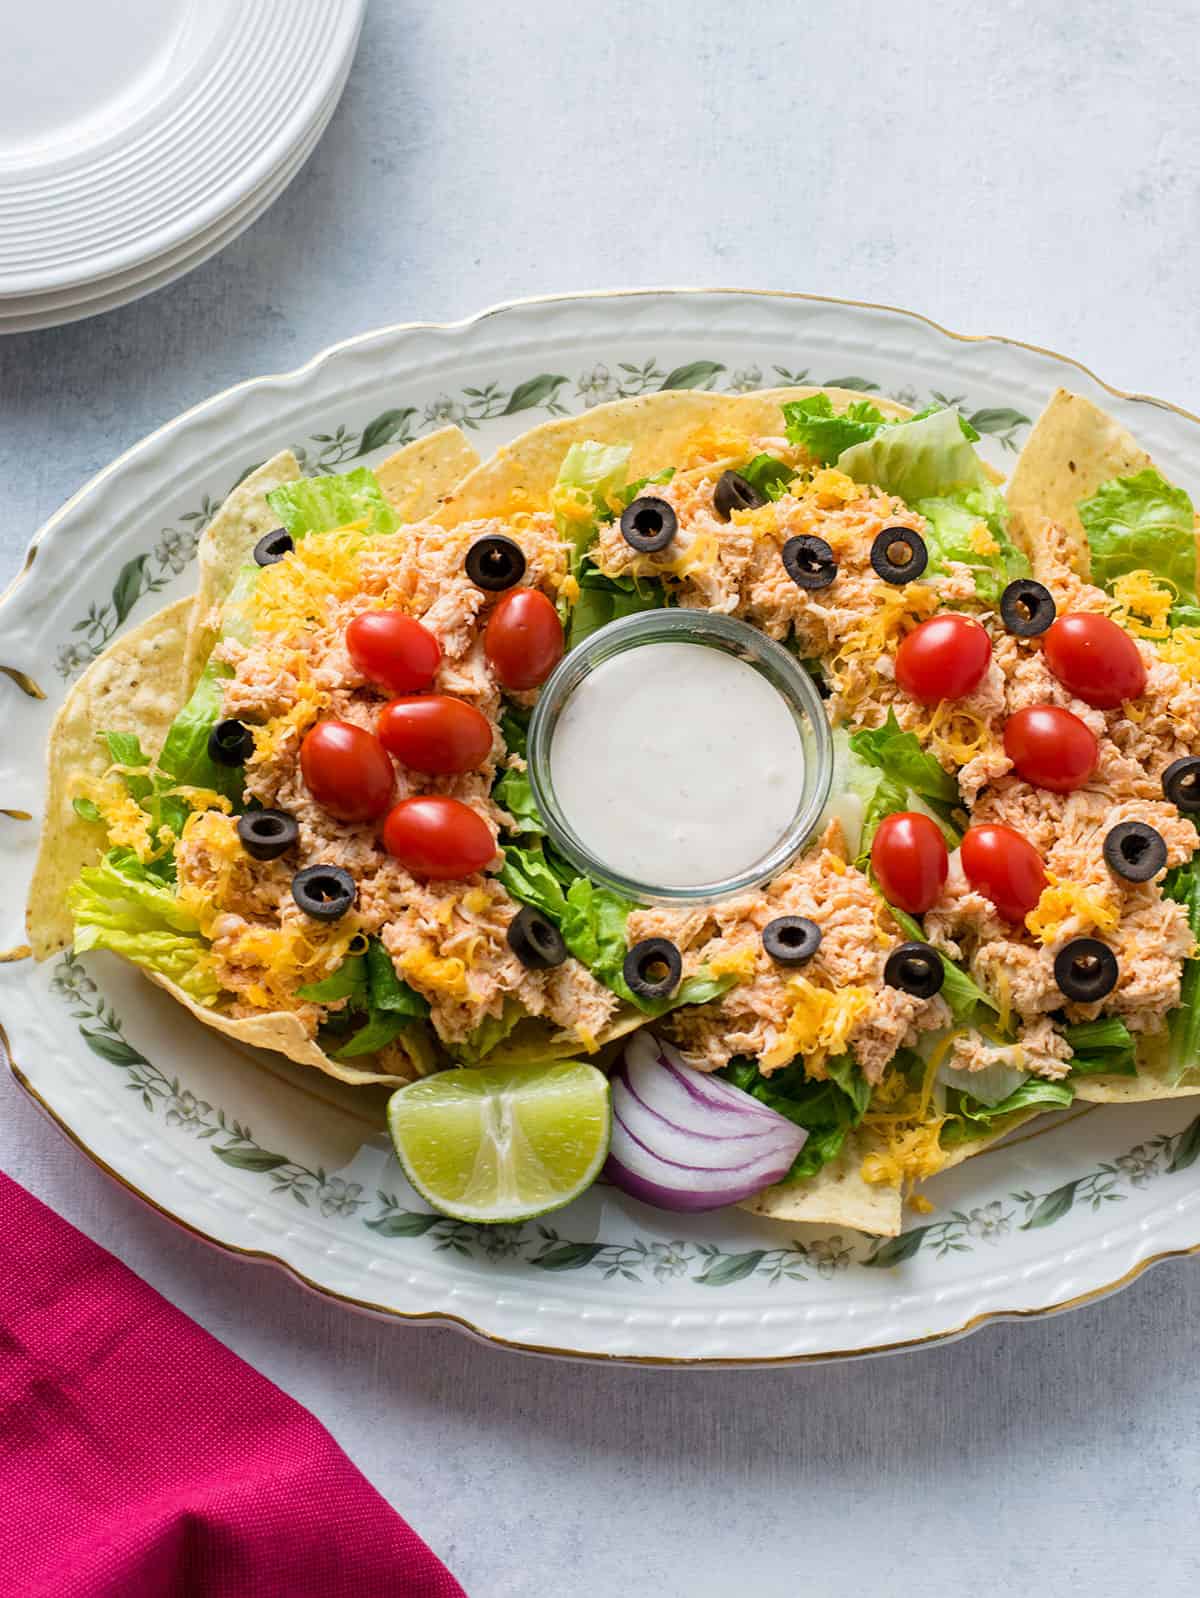 platter of shredded chicken on lettuce and nachos with olives, cheese, tomatoes, onion, lime, Ranch